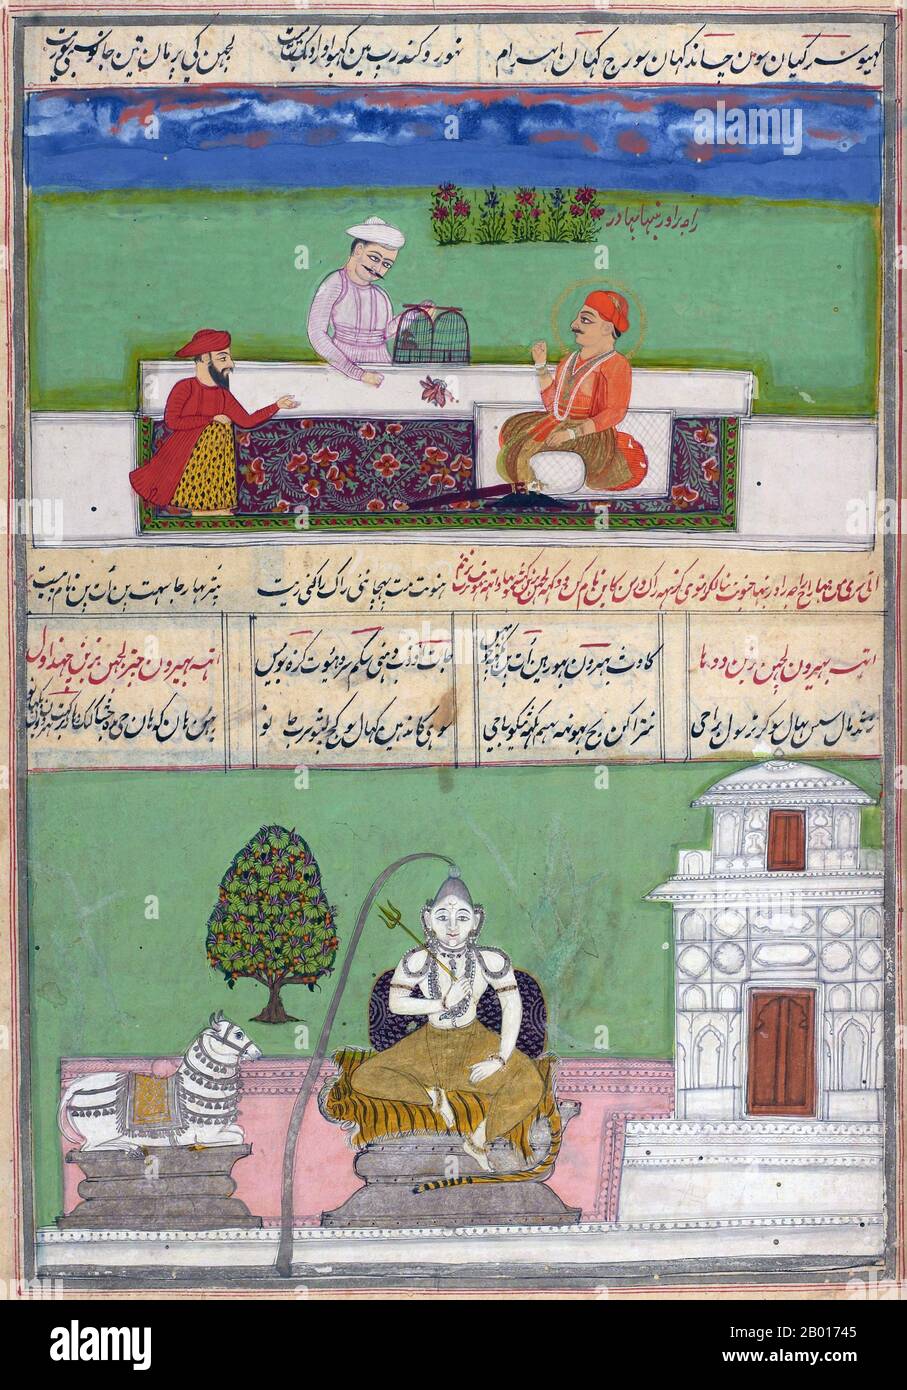 India: 'Above: Raja Rao Rabanha Bahadur with two men and bird on table; Below: Bhairav Raga, as Siva'. Ragamala miniature painting, c. 1800.  Ragamala Paintings are a series of illustrative paintings from medieval India based on Ragamala or the 'Garland of Ragas', depicting various Indian musical nodes, Ragas. They stand as a classical example of the amalgamation of art, poetry and classical music in medieval India. Ragamala paintings were created in most schools of Indian painting, starting in the 16th and 17th centuries. Stock Photo